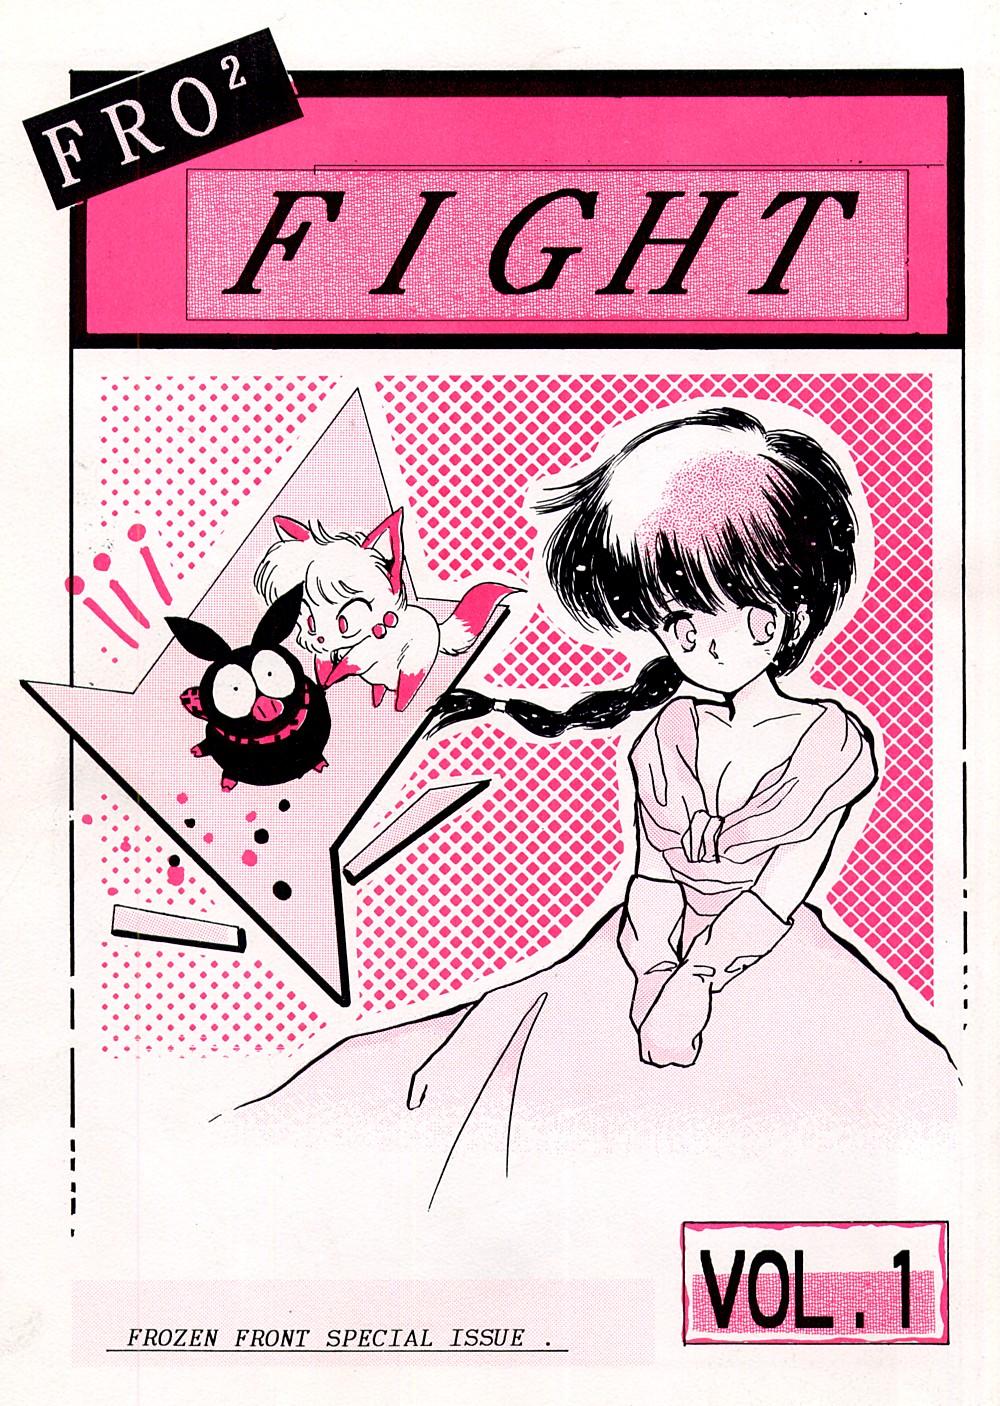 Fro2 Fight Vol. 1 0